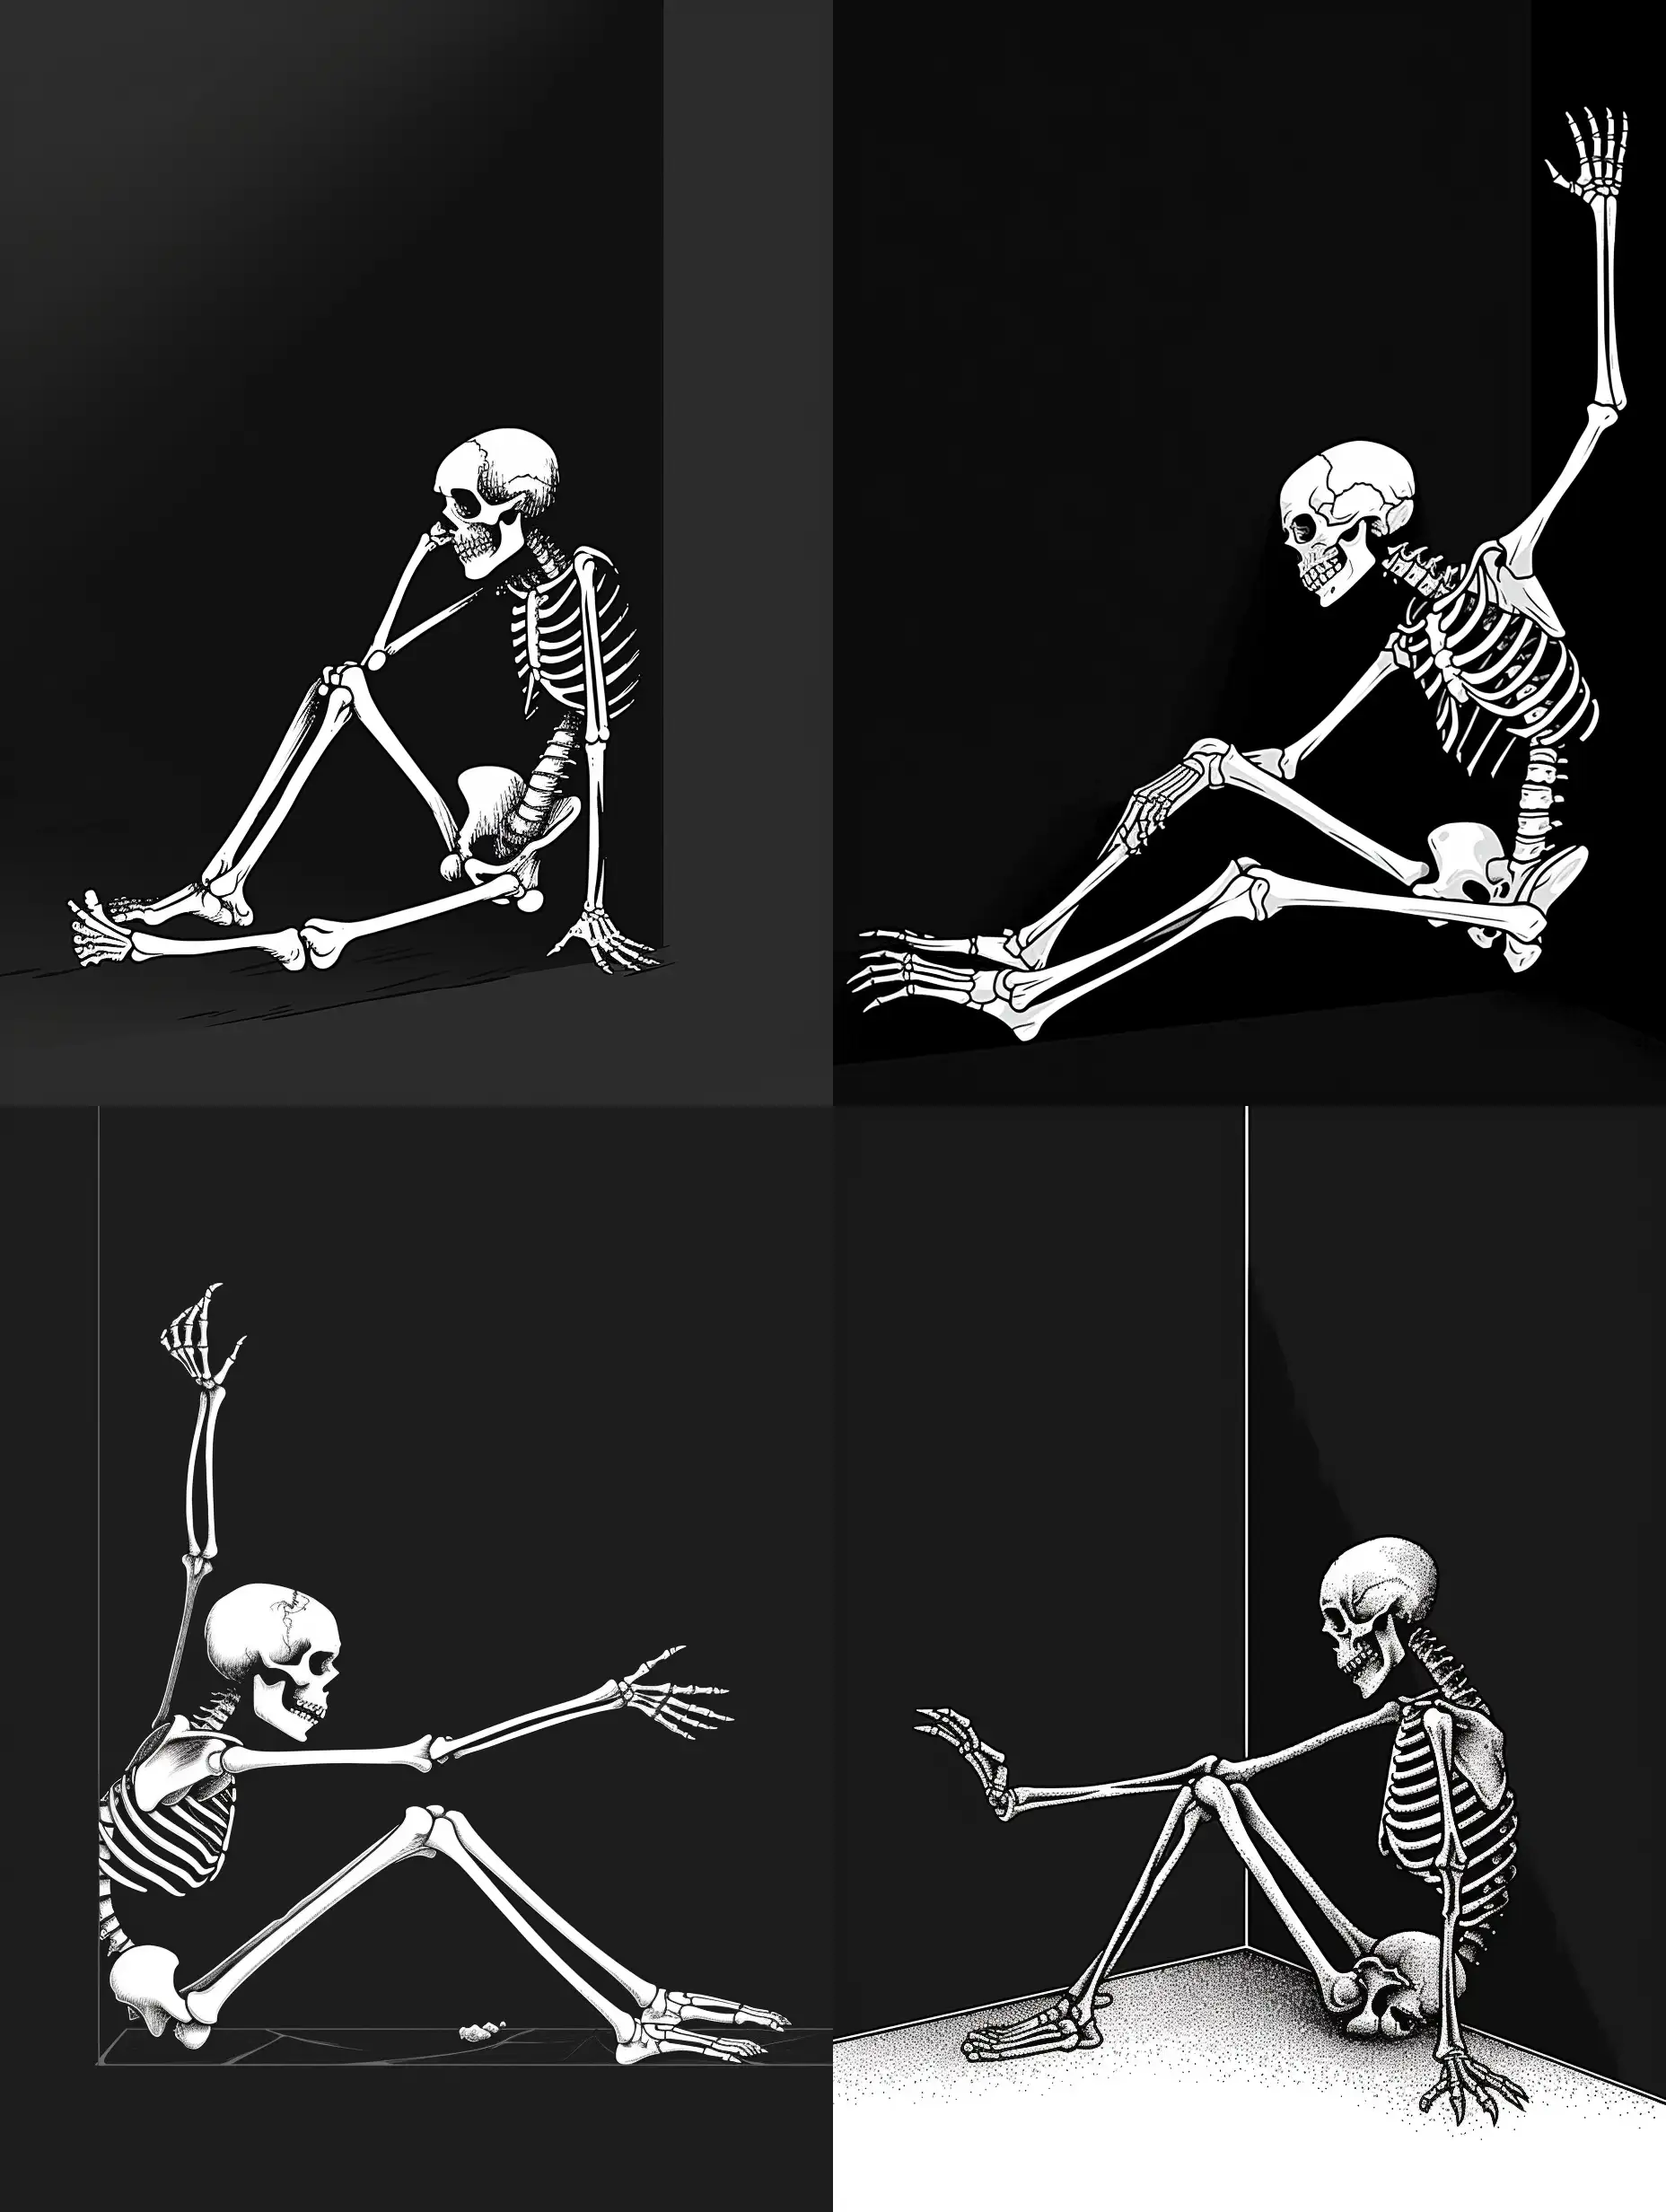 Solitude-and-Sorrow-Minimalistic-Depiction-of-a-Fearful-Skeleton-in-a-Dark-Corner